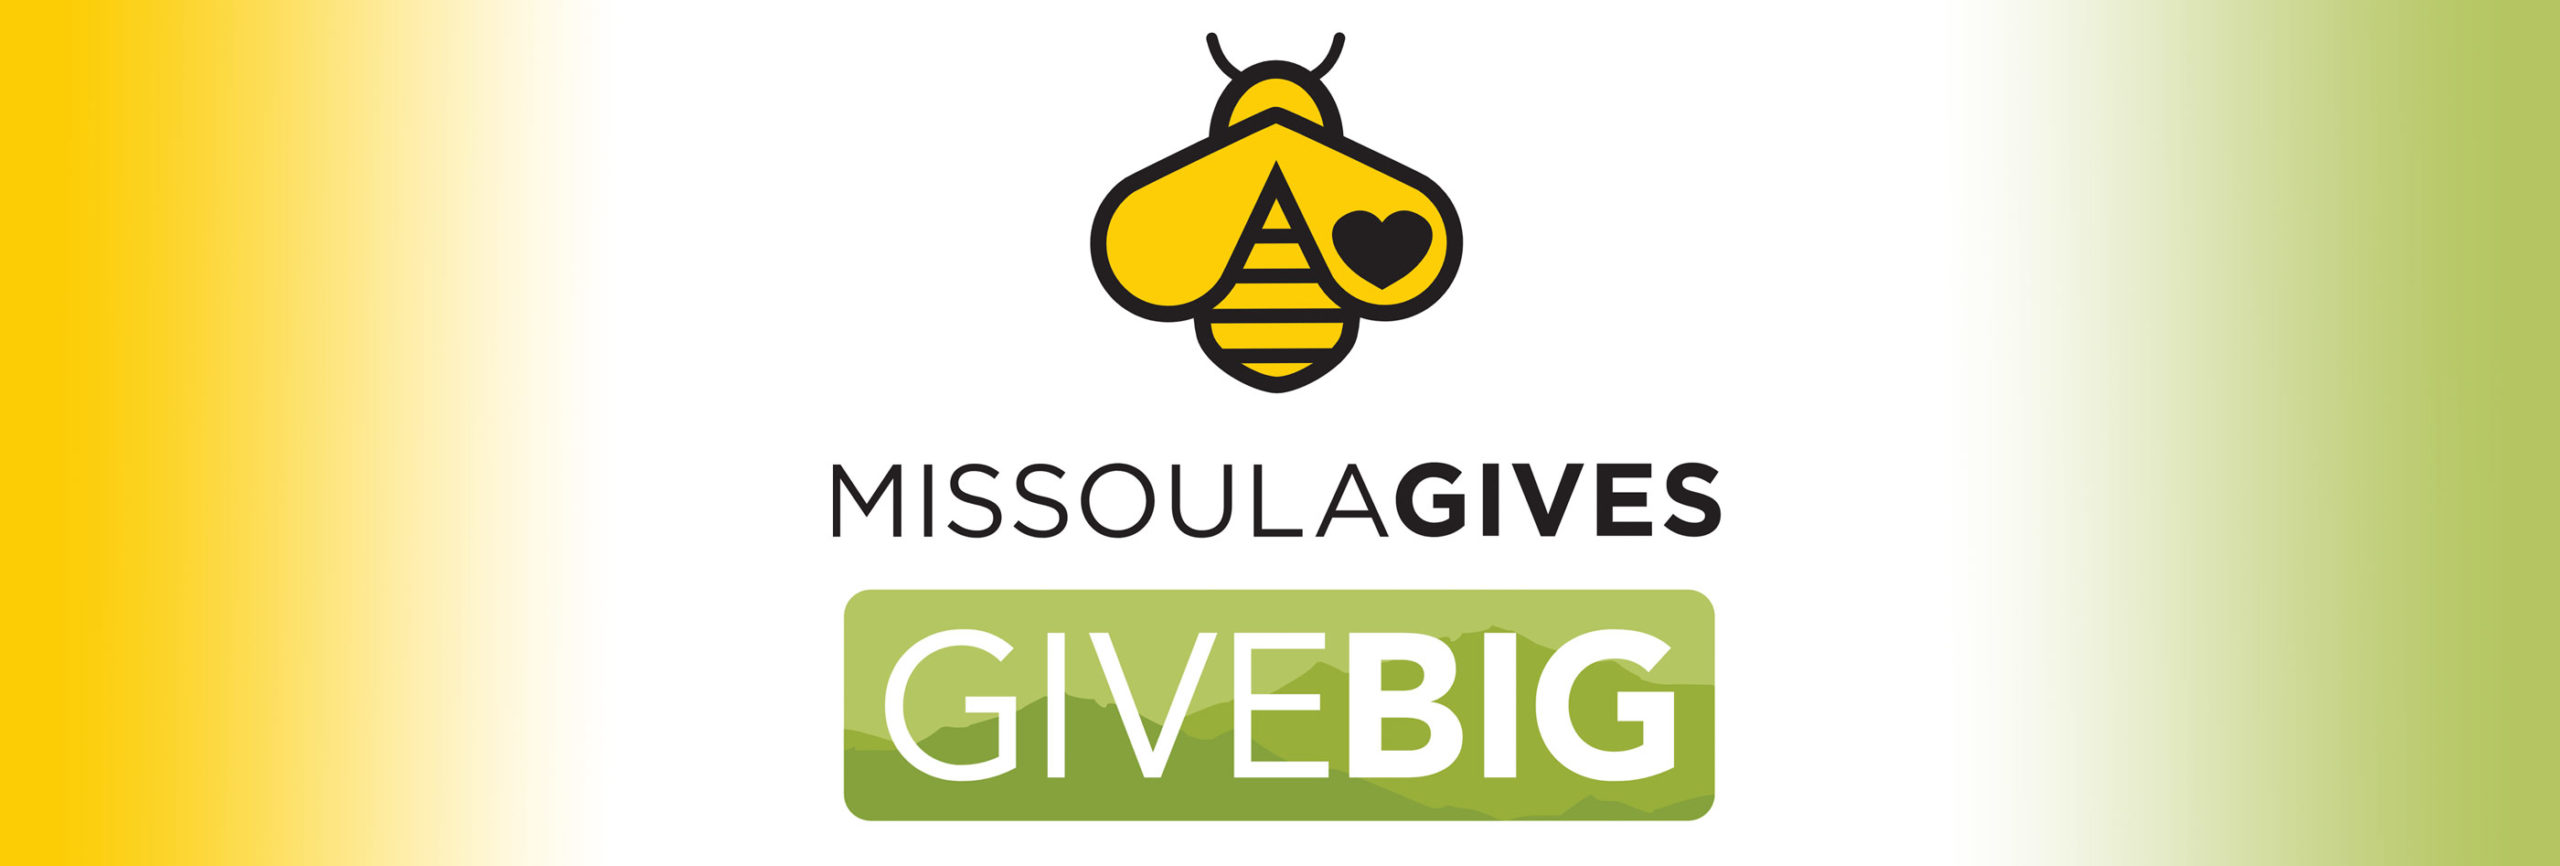 Support Your Favorite Nonprofits During Montana’s Biggest Giving Celebration Image